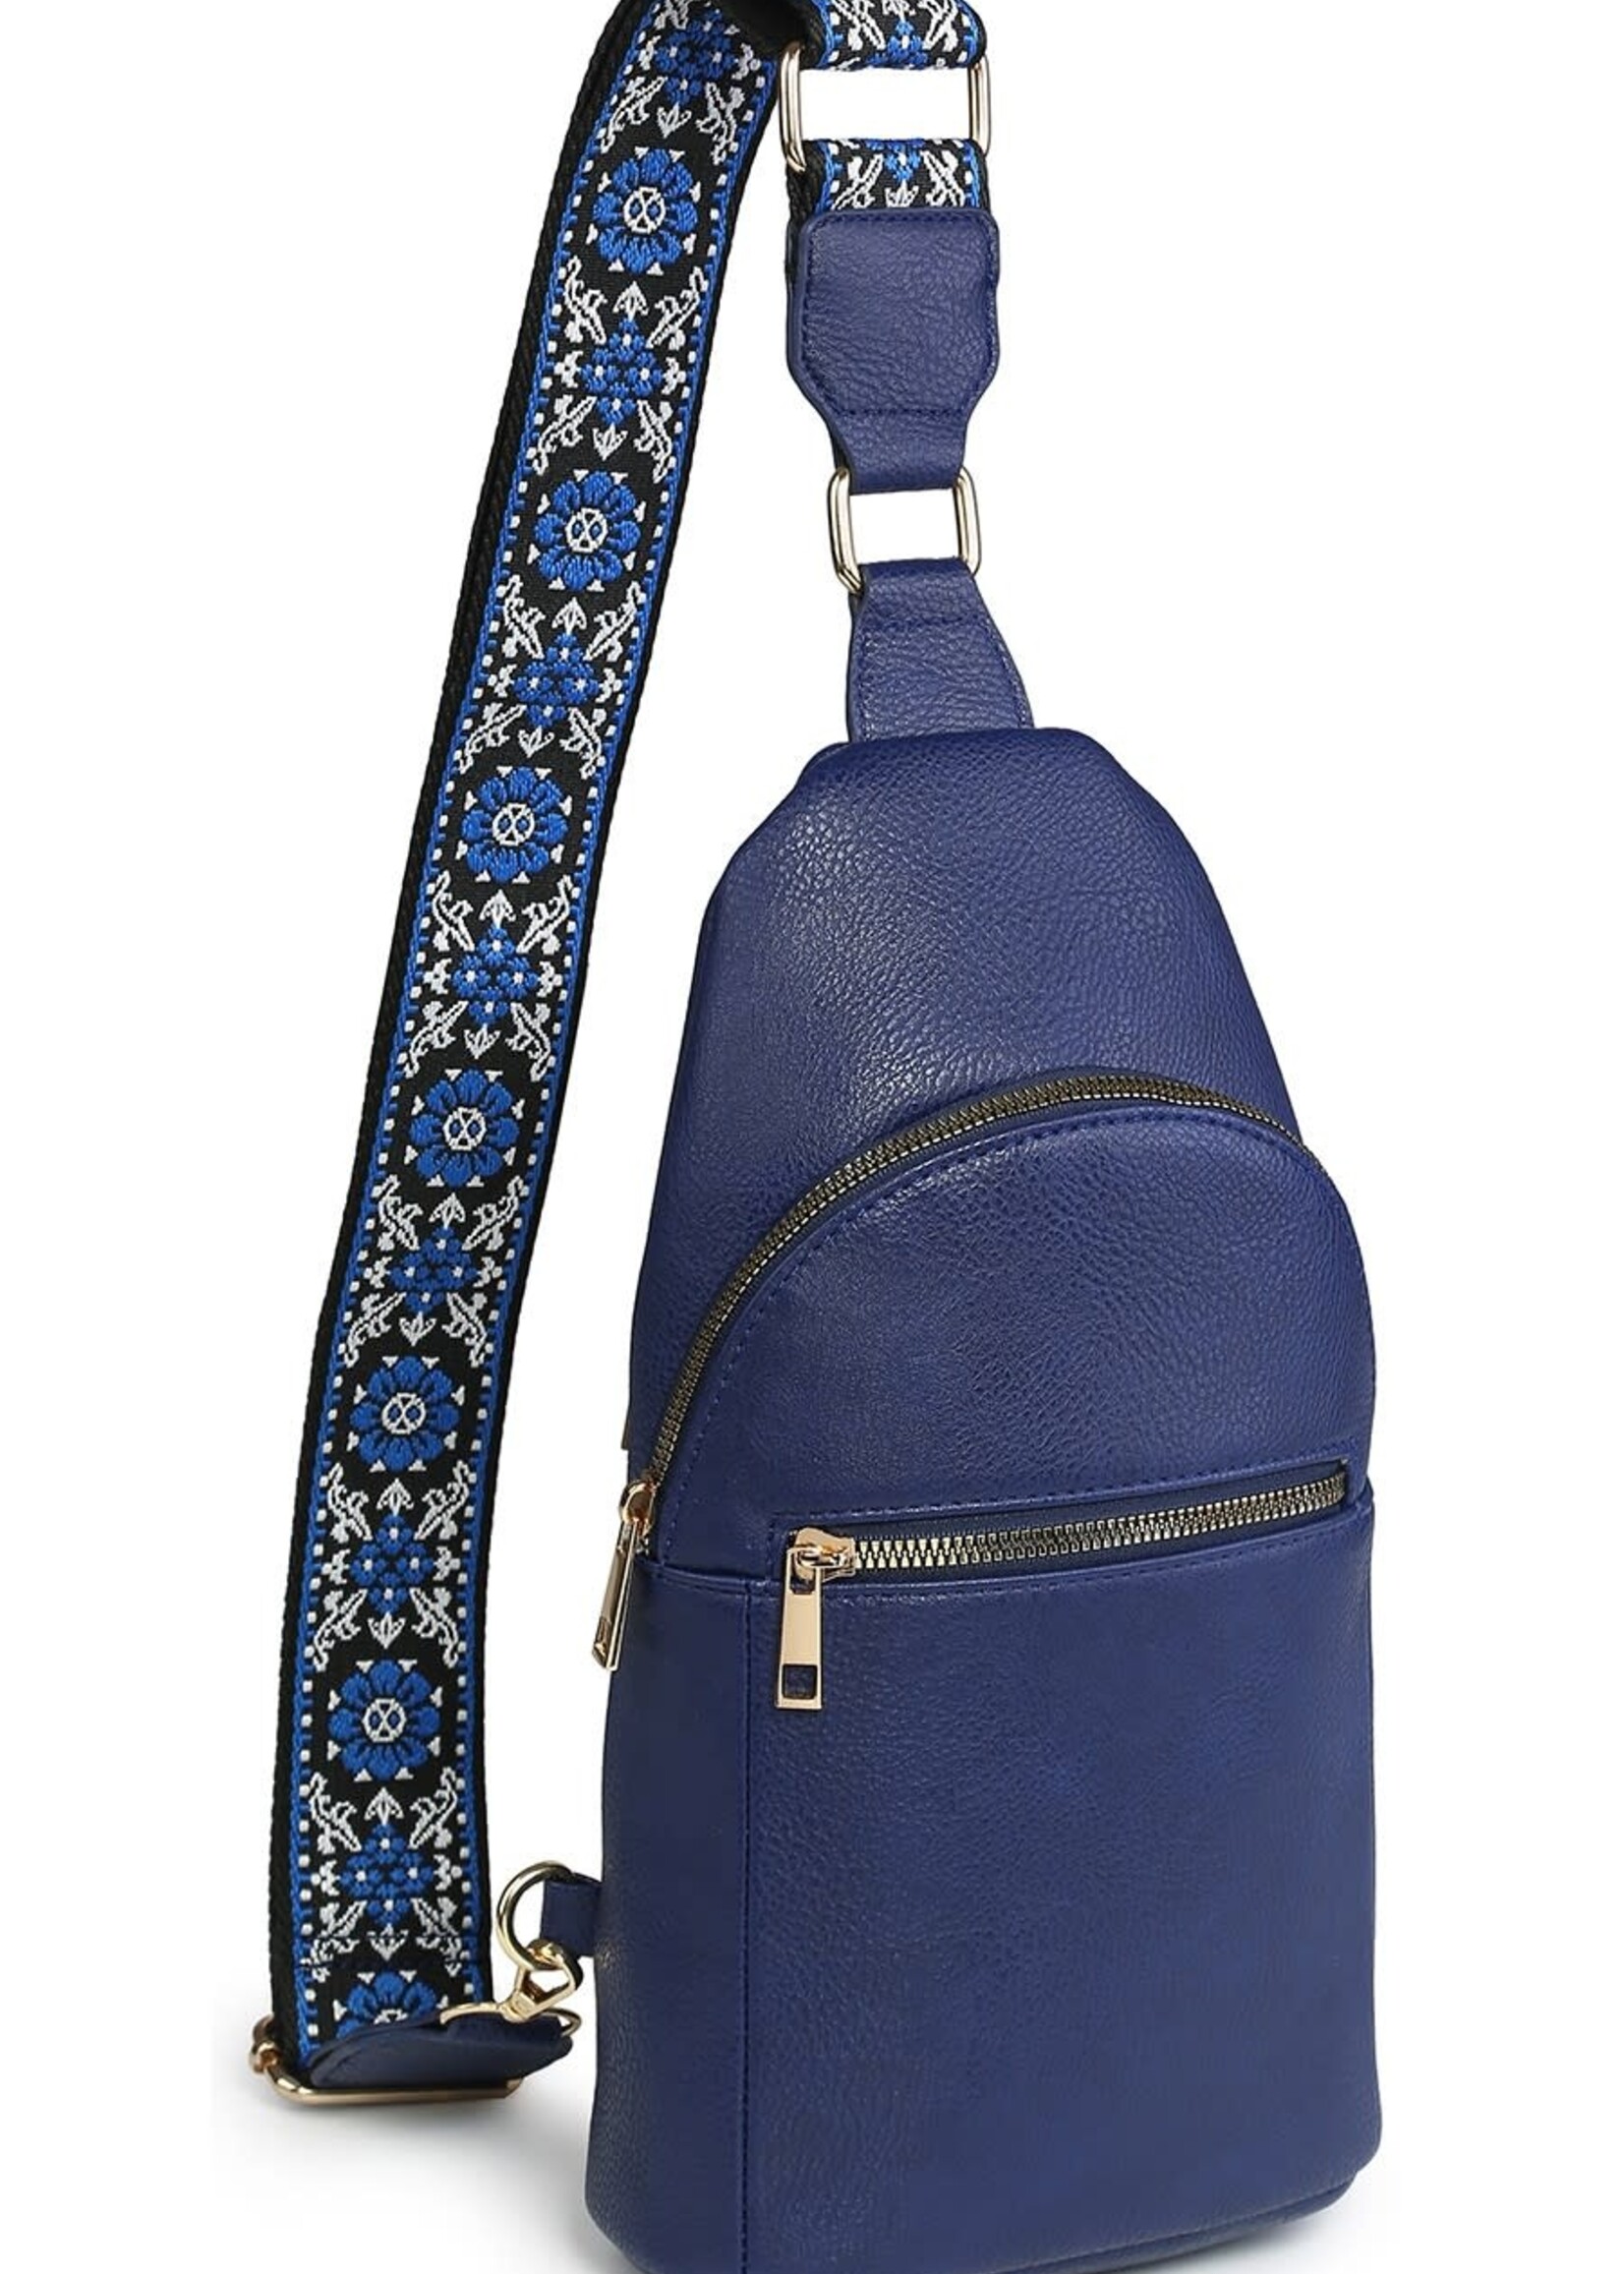 fashion world Sling back pack with guitar strap- 3 color ways